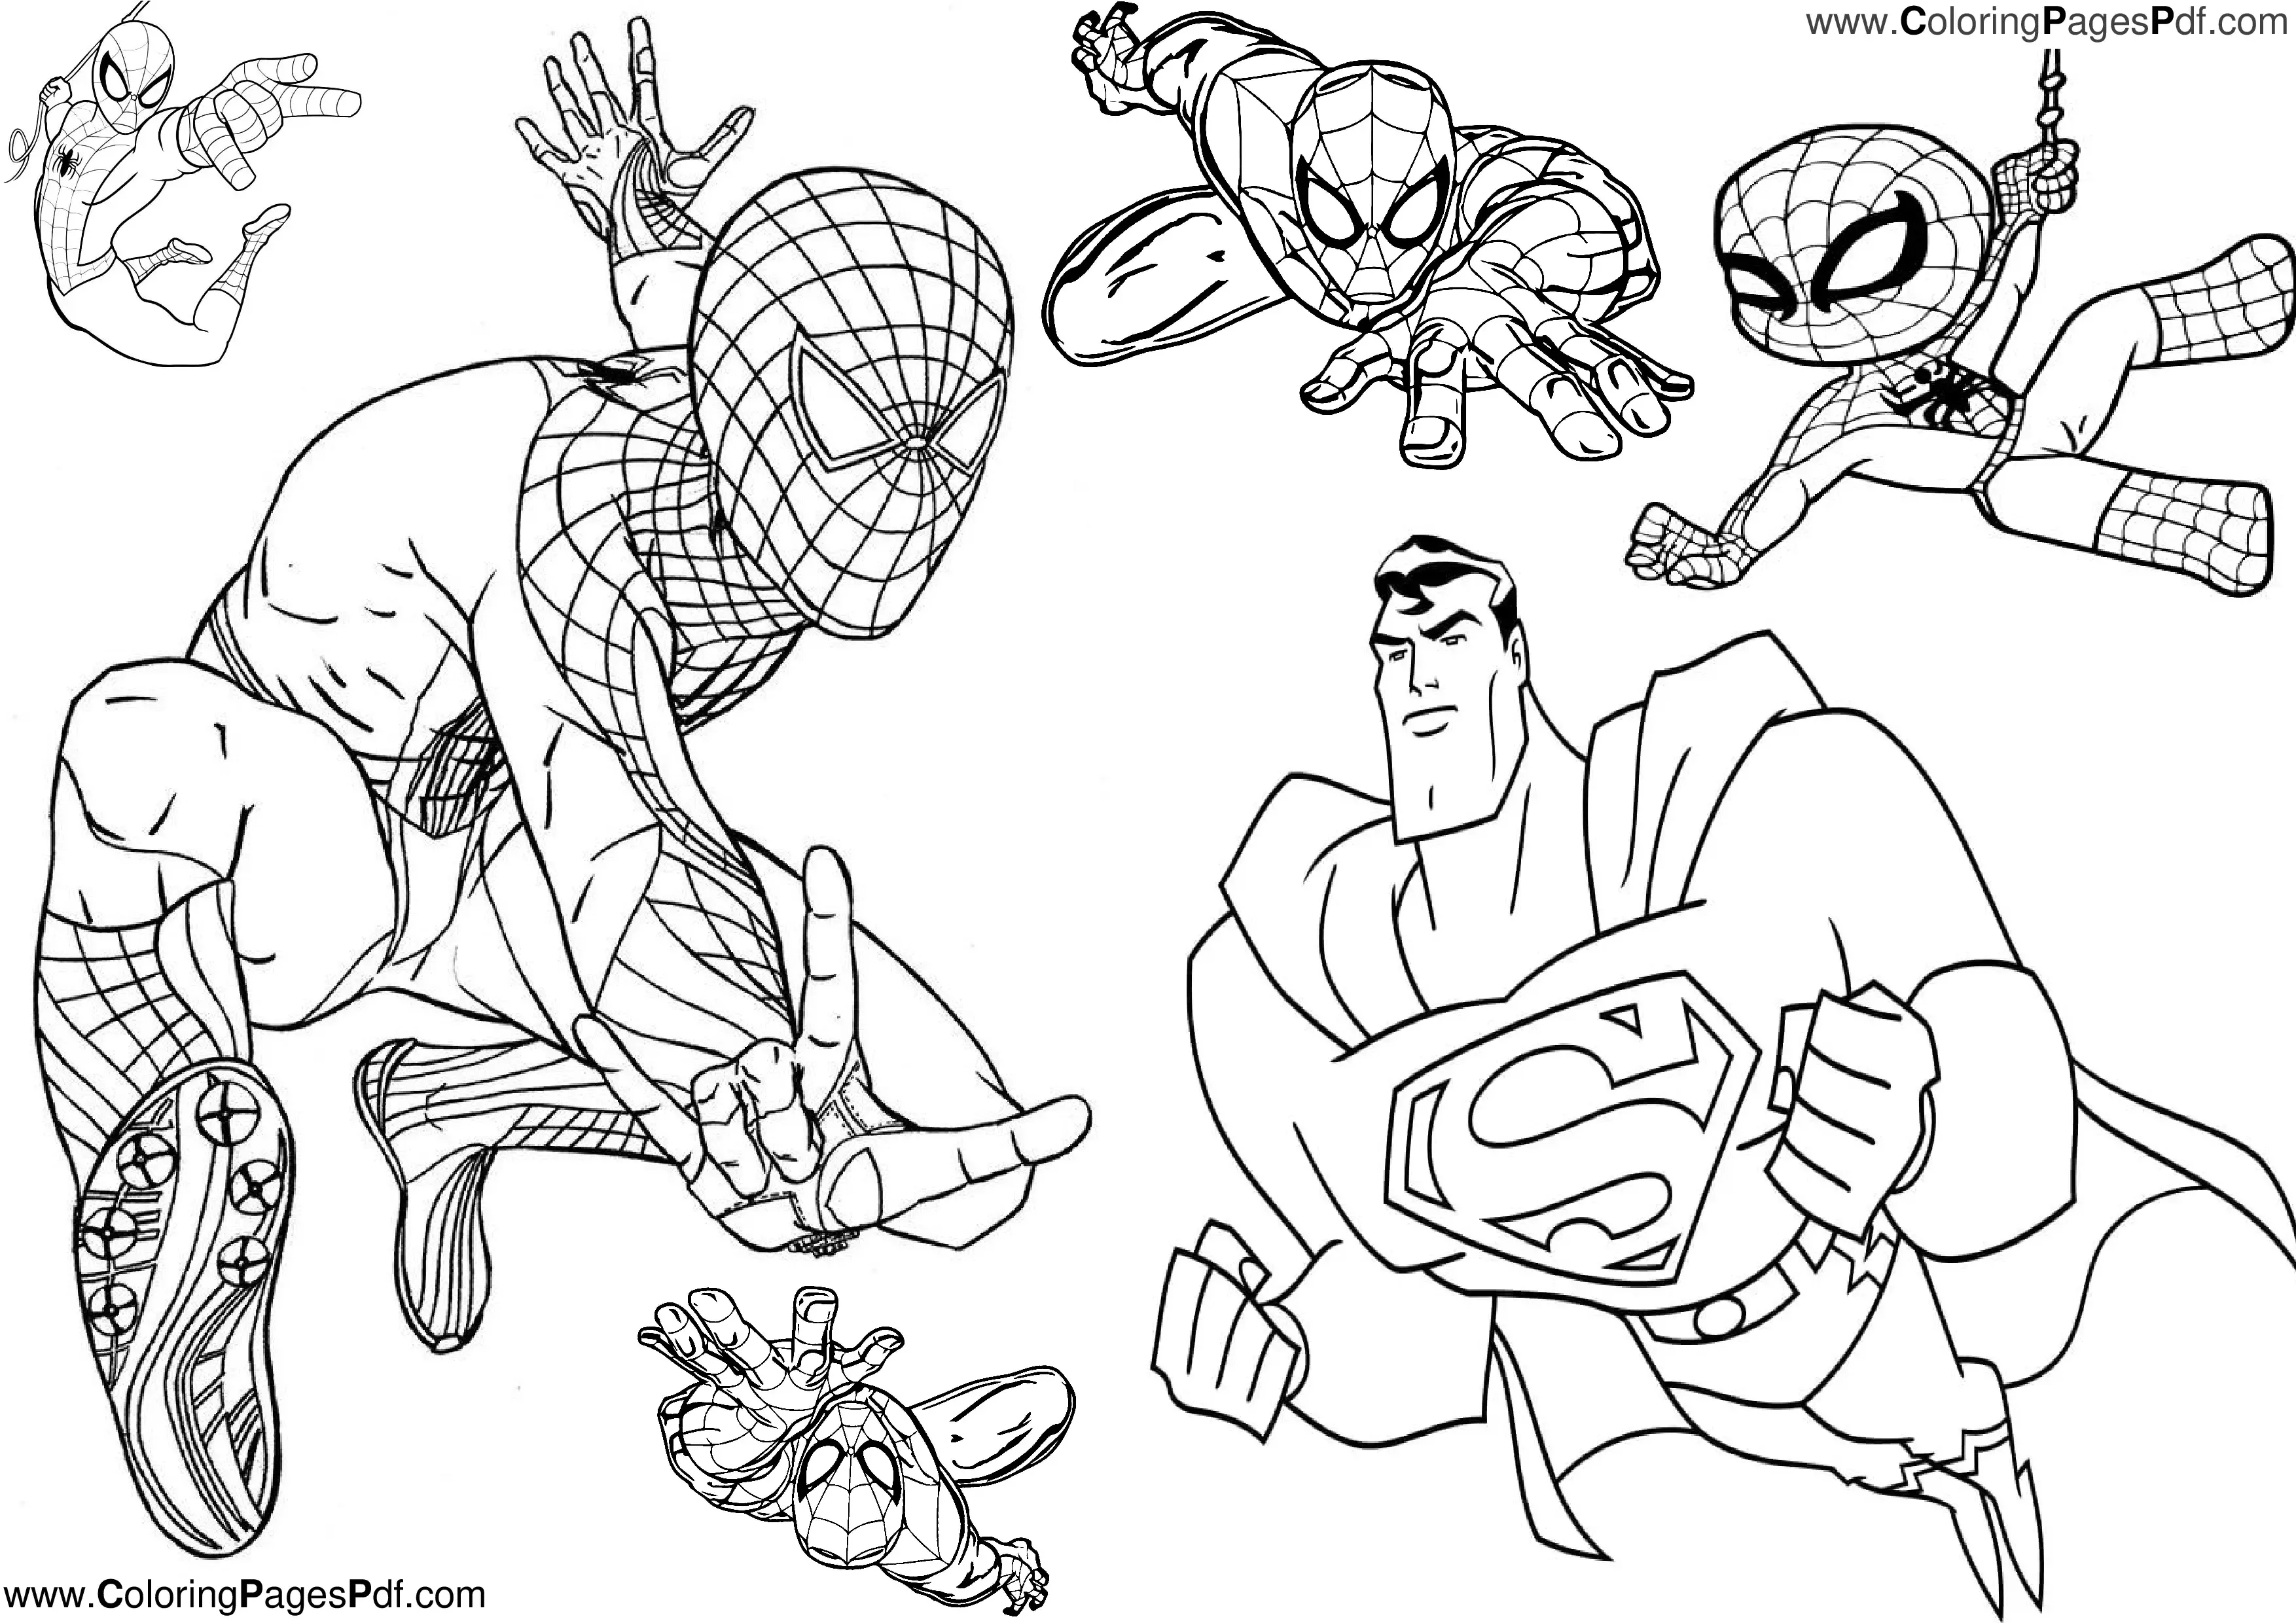 Superman & spiderman coloring pages